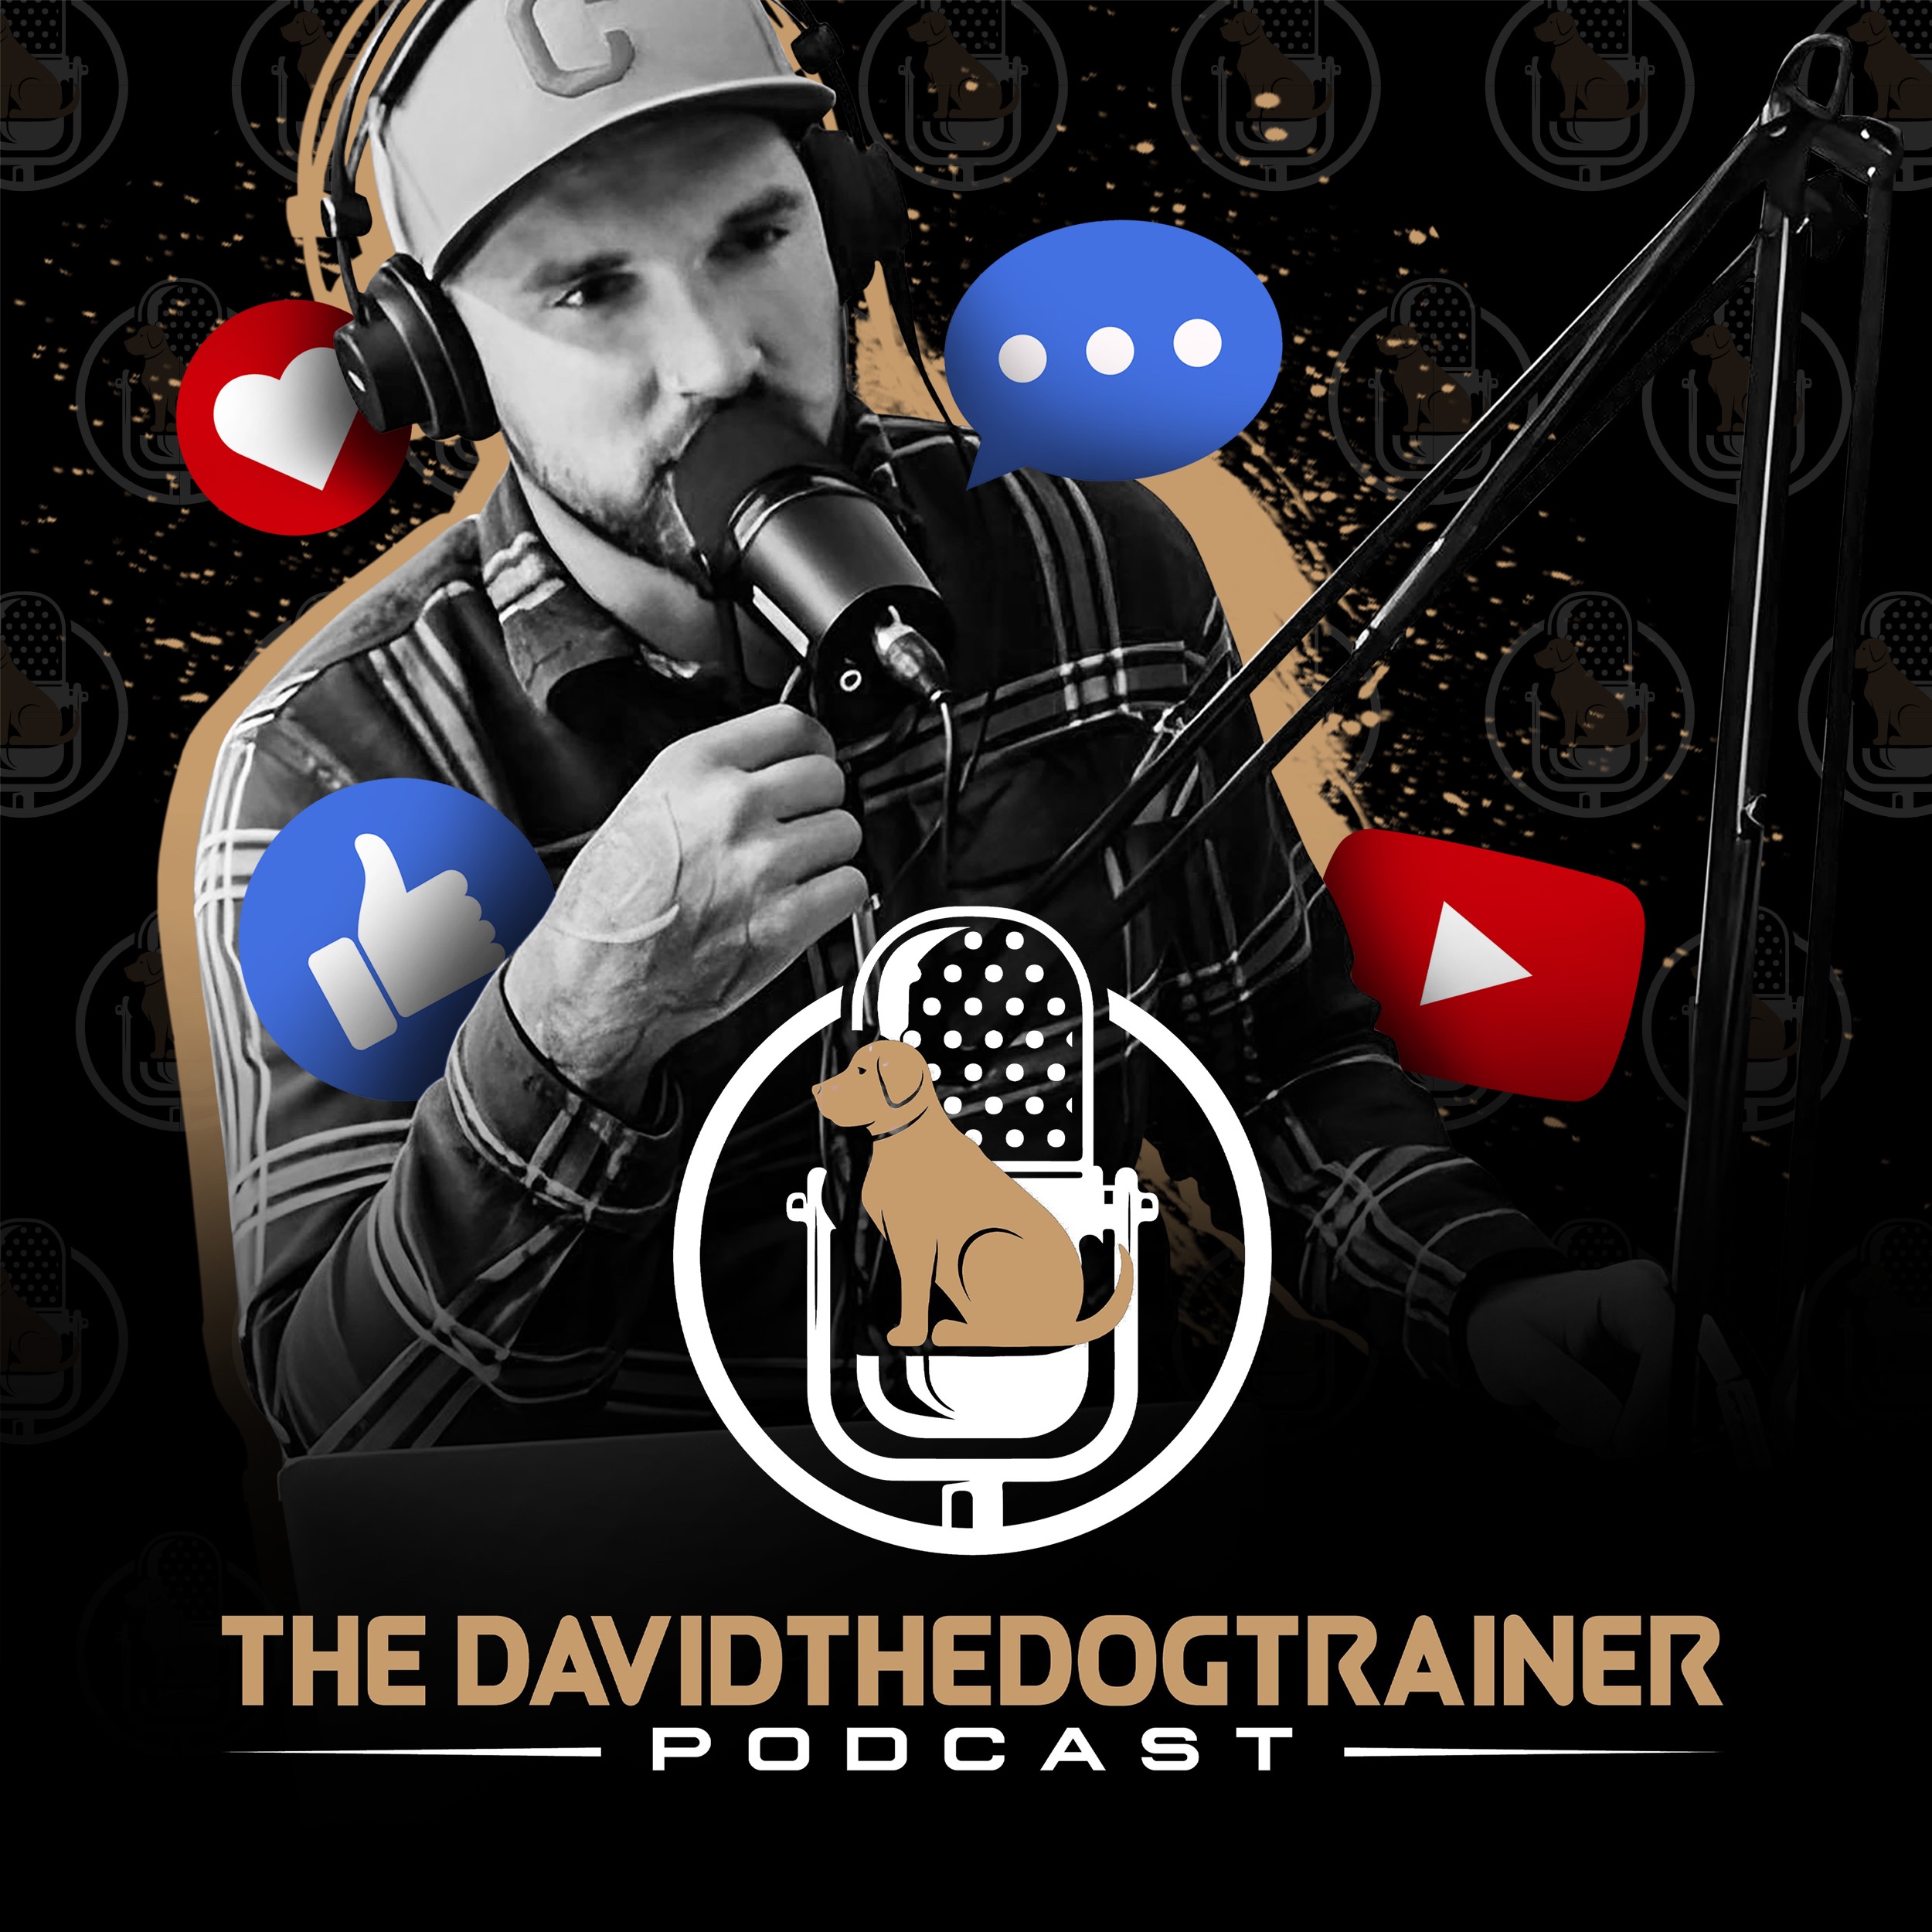 The Davidthedogtrainer Podcast